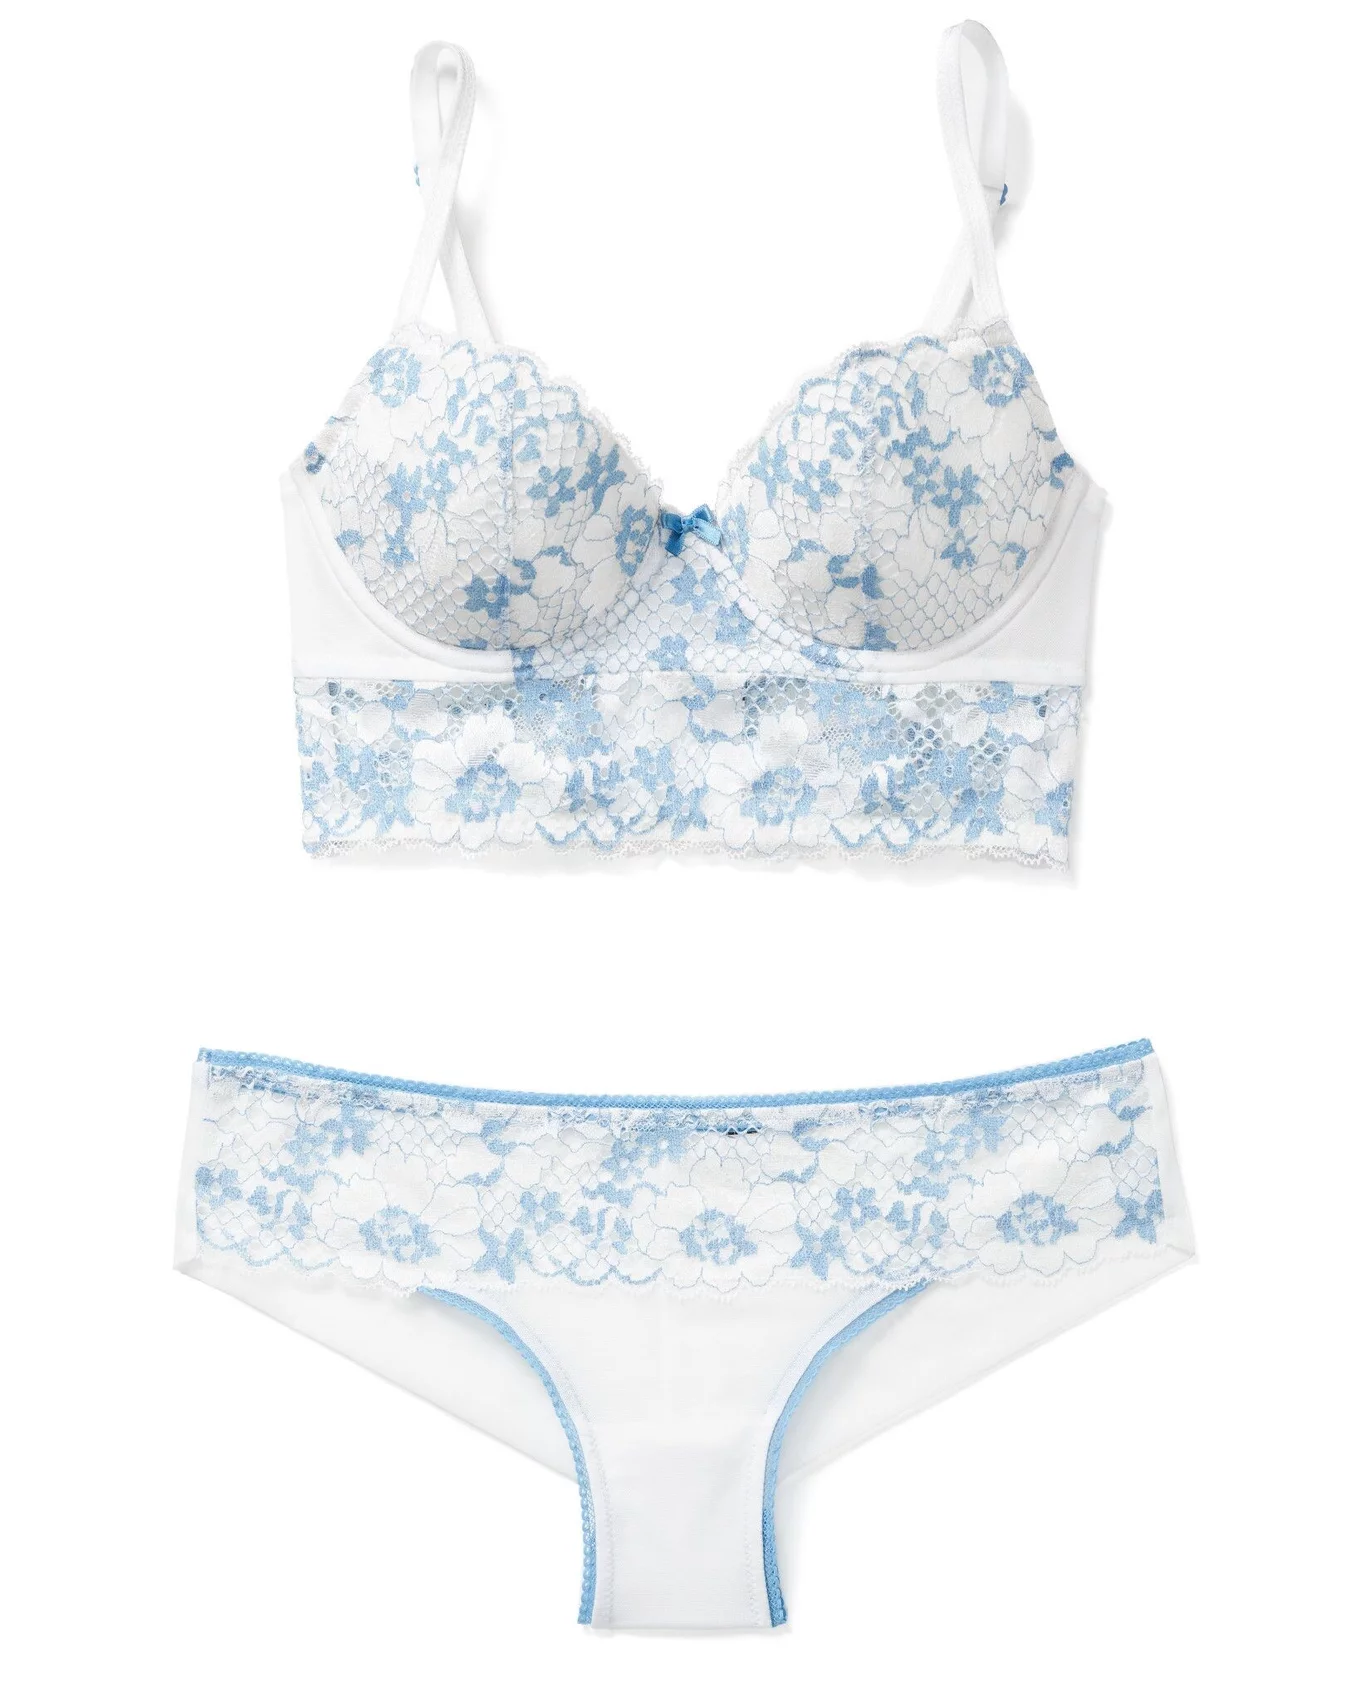 Cute Lingerie Set, White Color Size 32 D and Small Panties